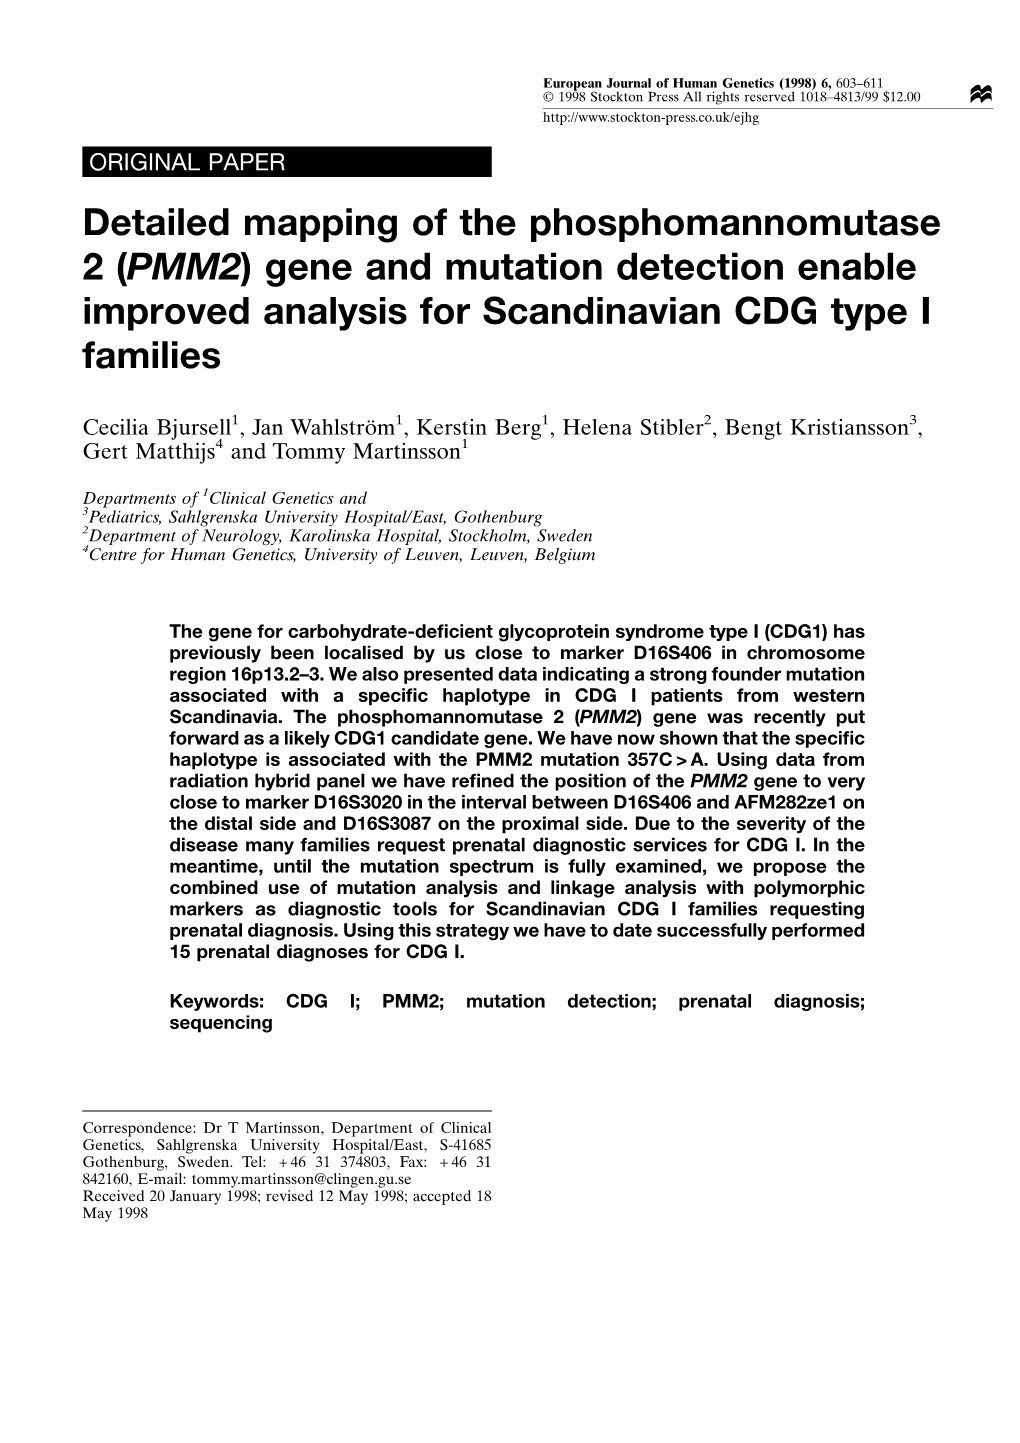 Detailed Mapping of the Phosphomannomutase 2 (PMM2) Gene and Mutation Detection Enable Improved Analysis for Scandinavian CDG Type I Families